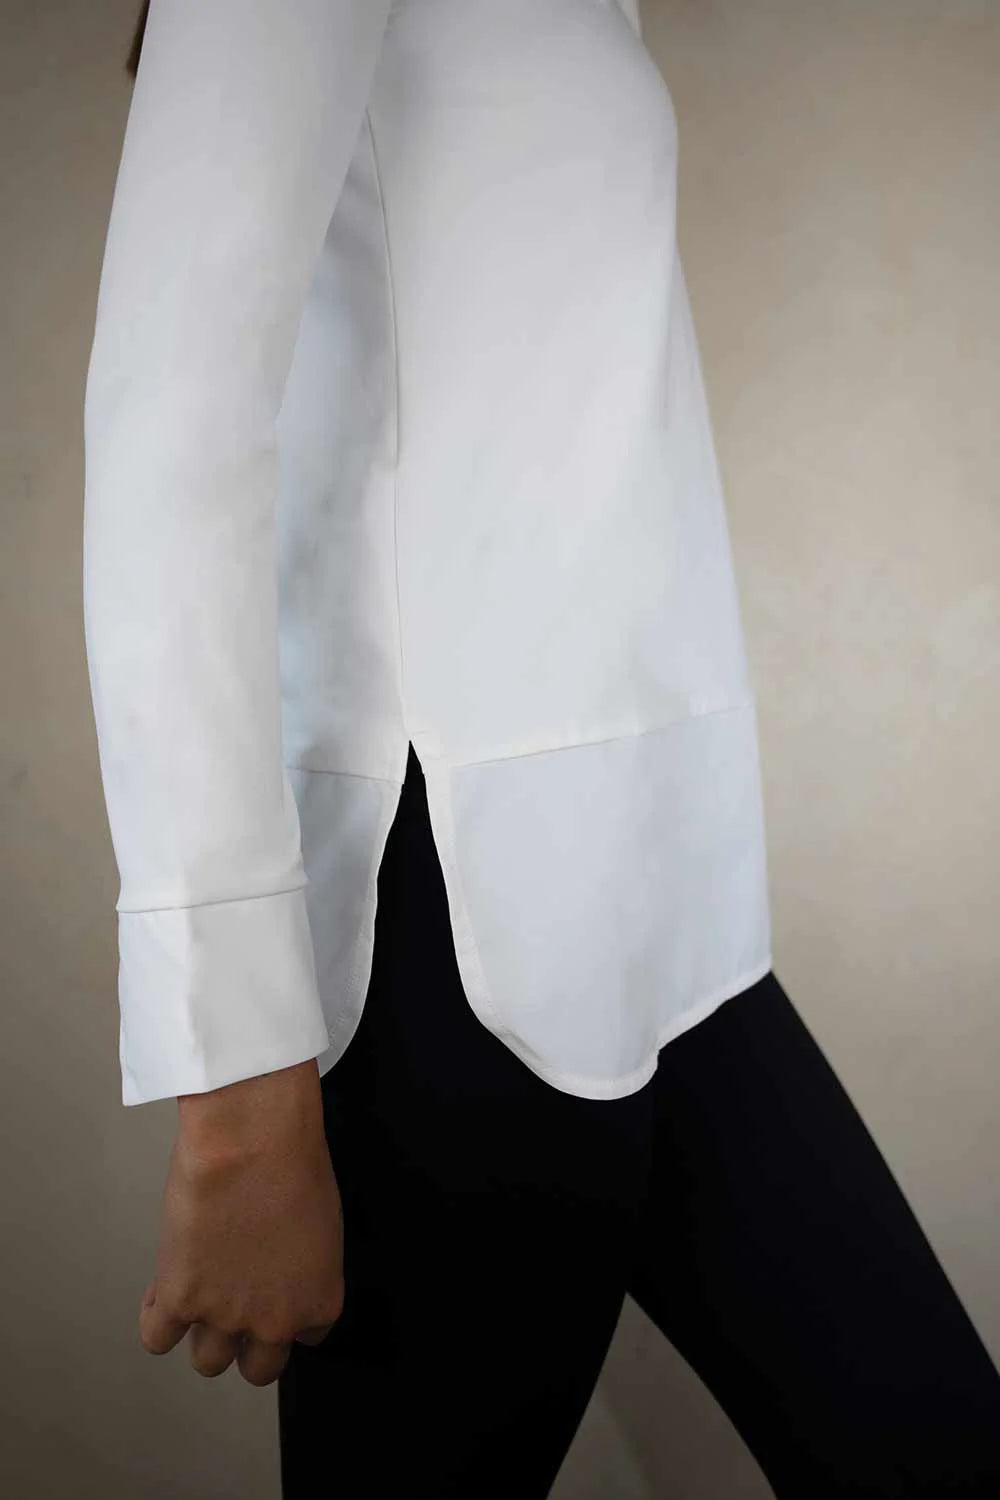 Fenty Layering Shirt White | No2moro | Orchid Boutique